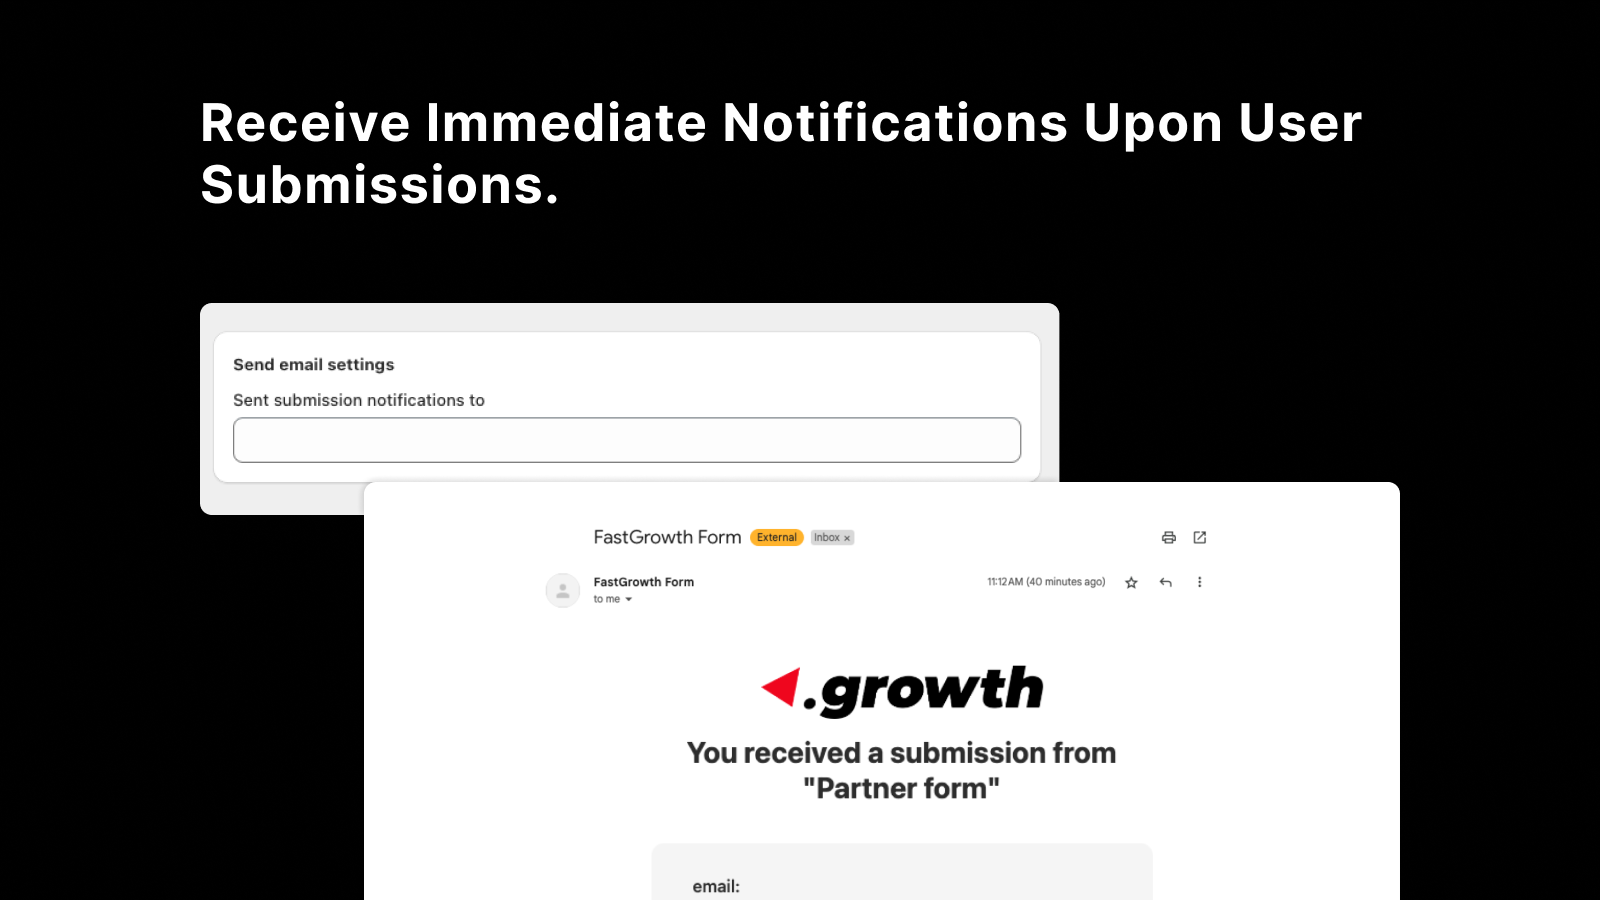 Receive immediate notifications upon user submissions.